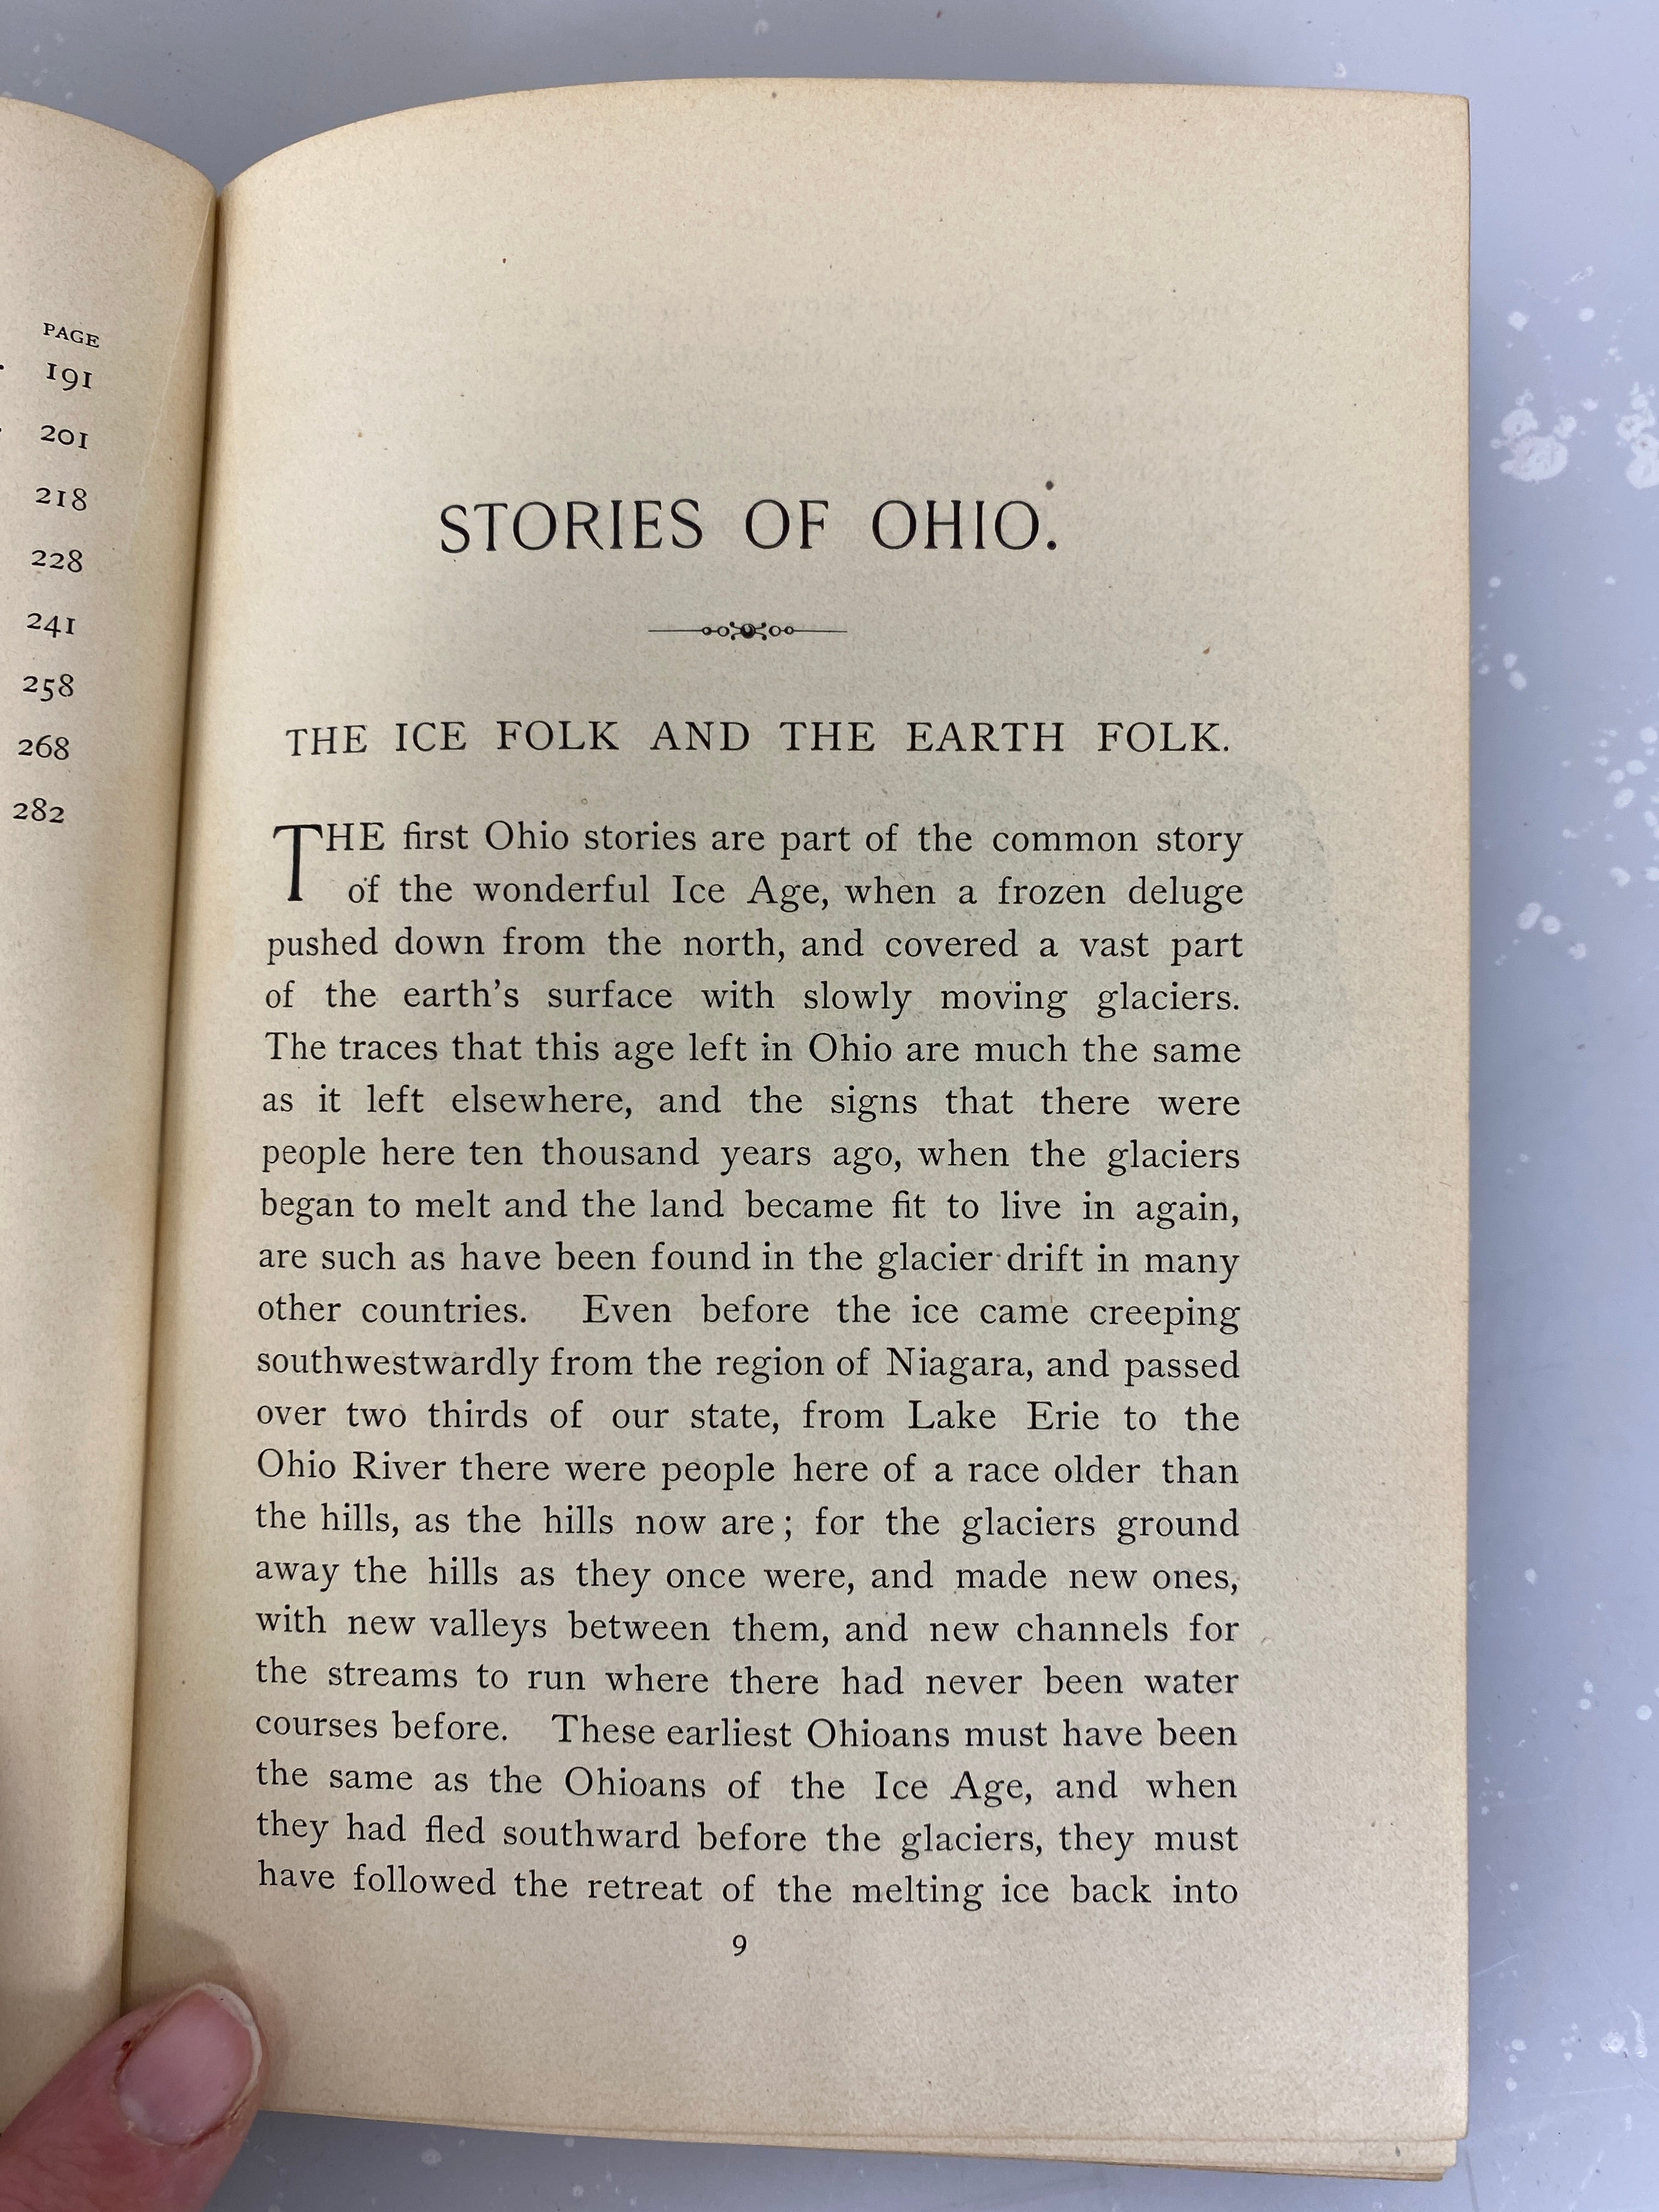 Antique Stories of Ohio by William Dean Howells 1897 American Book Company HC